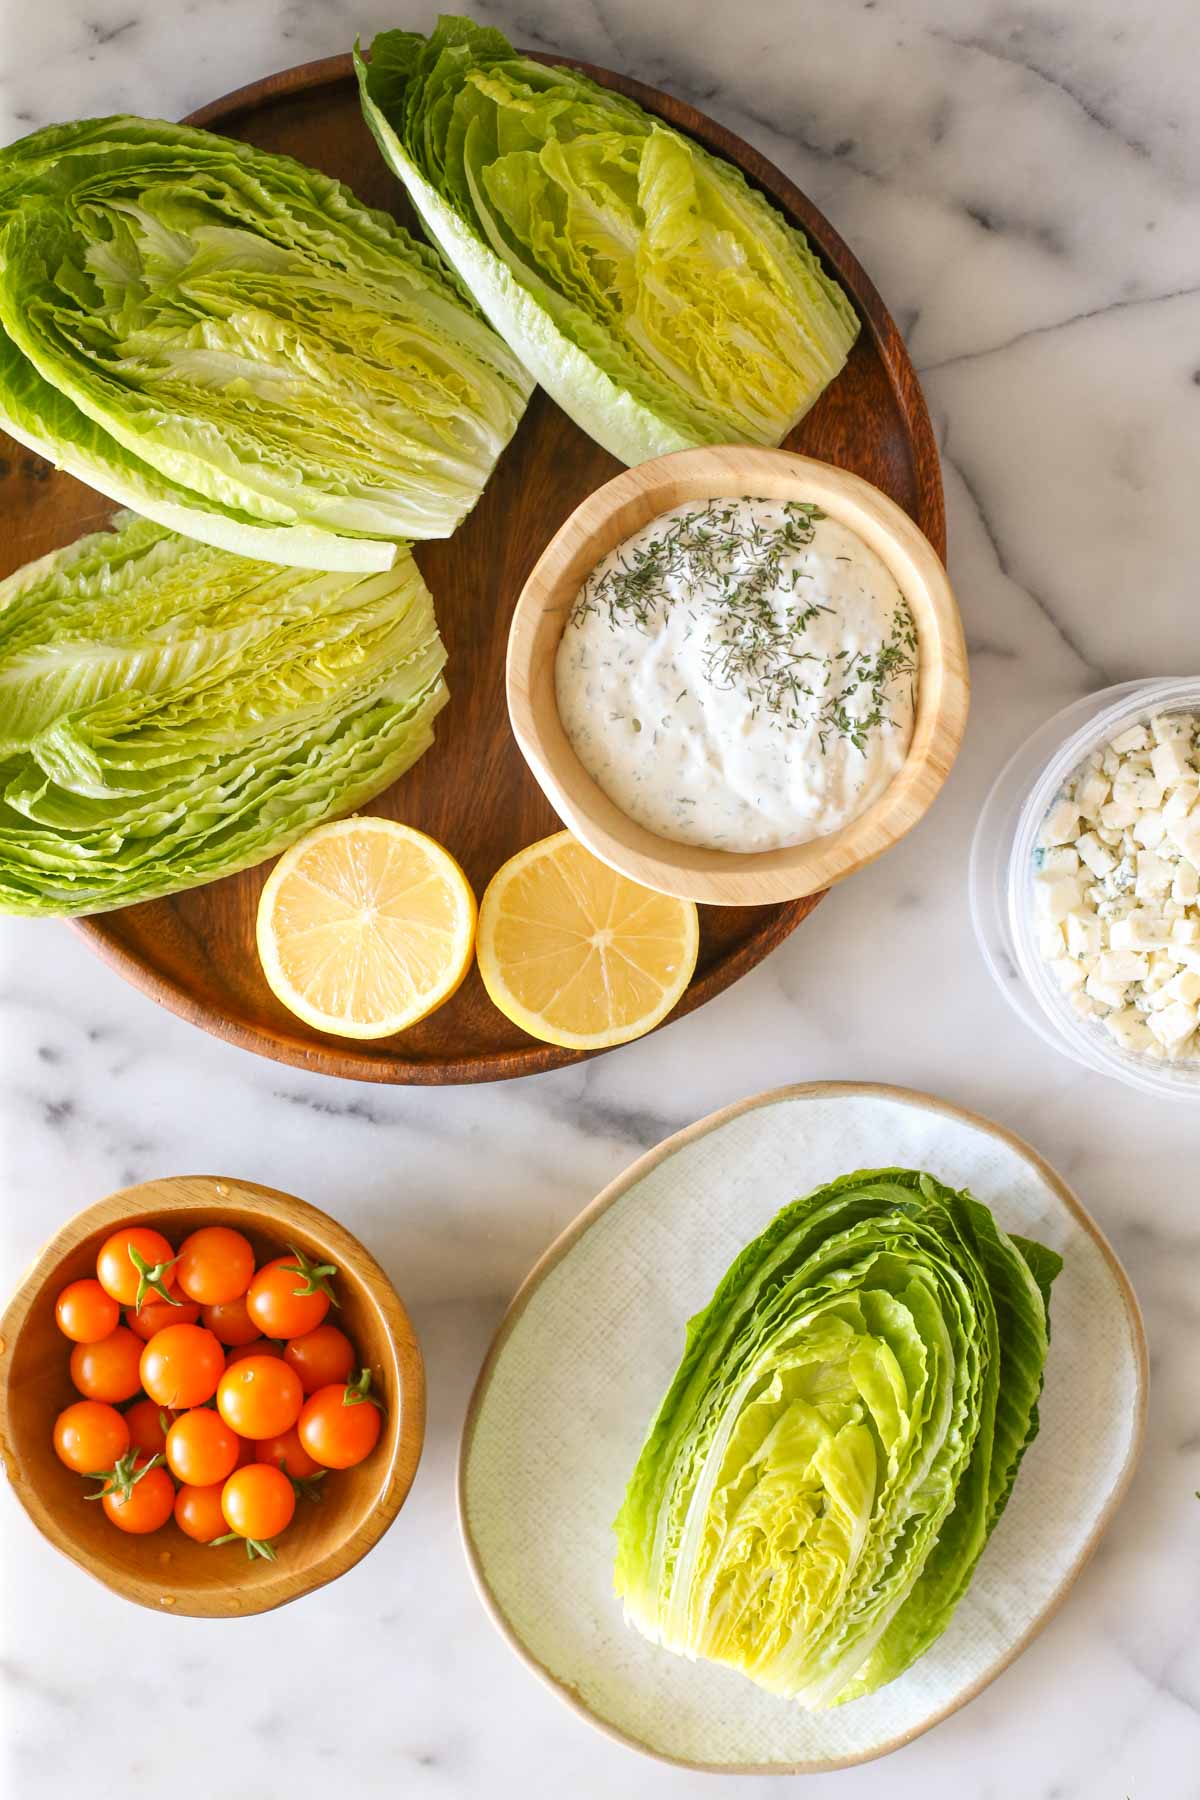 Overhead shot of a wood platter with three romaine lettuce halves, lemon wedges and a wood bowl of the blue cheese dressing on it, sitting next to a wood bowl of Sungold tomatoes, a container of blue cheese and a plate with a romaine lettuce half on it, all on a marble background.  